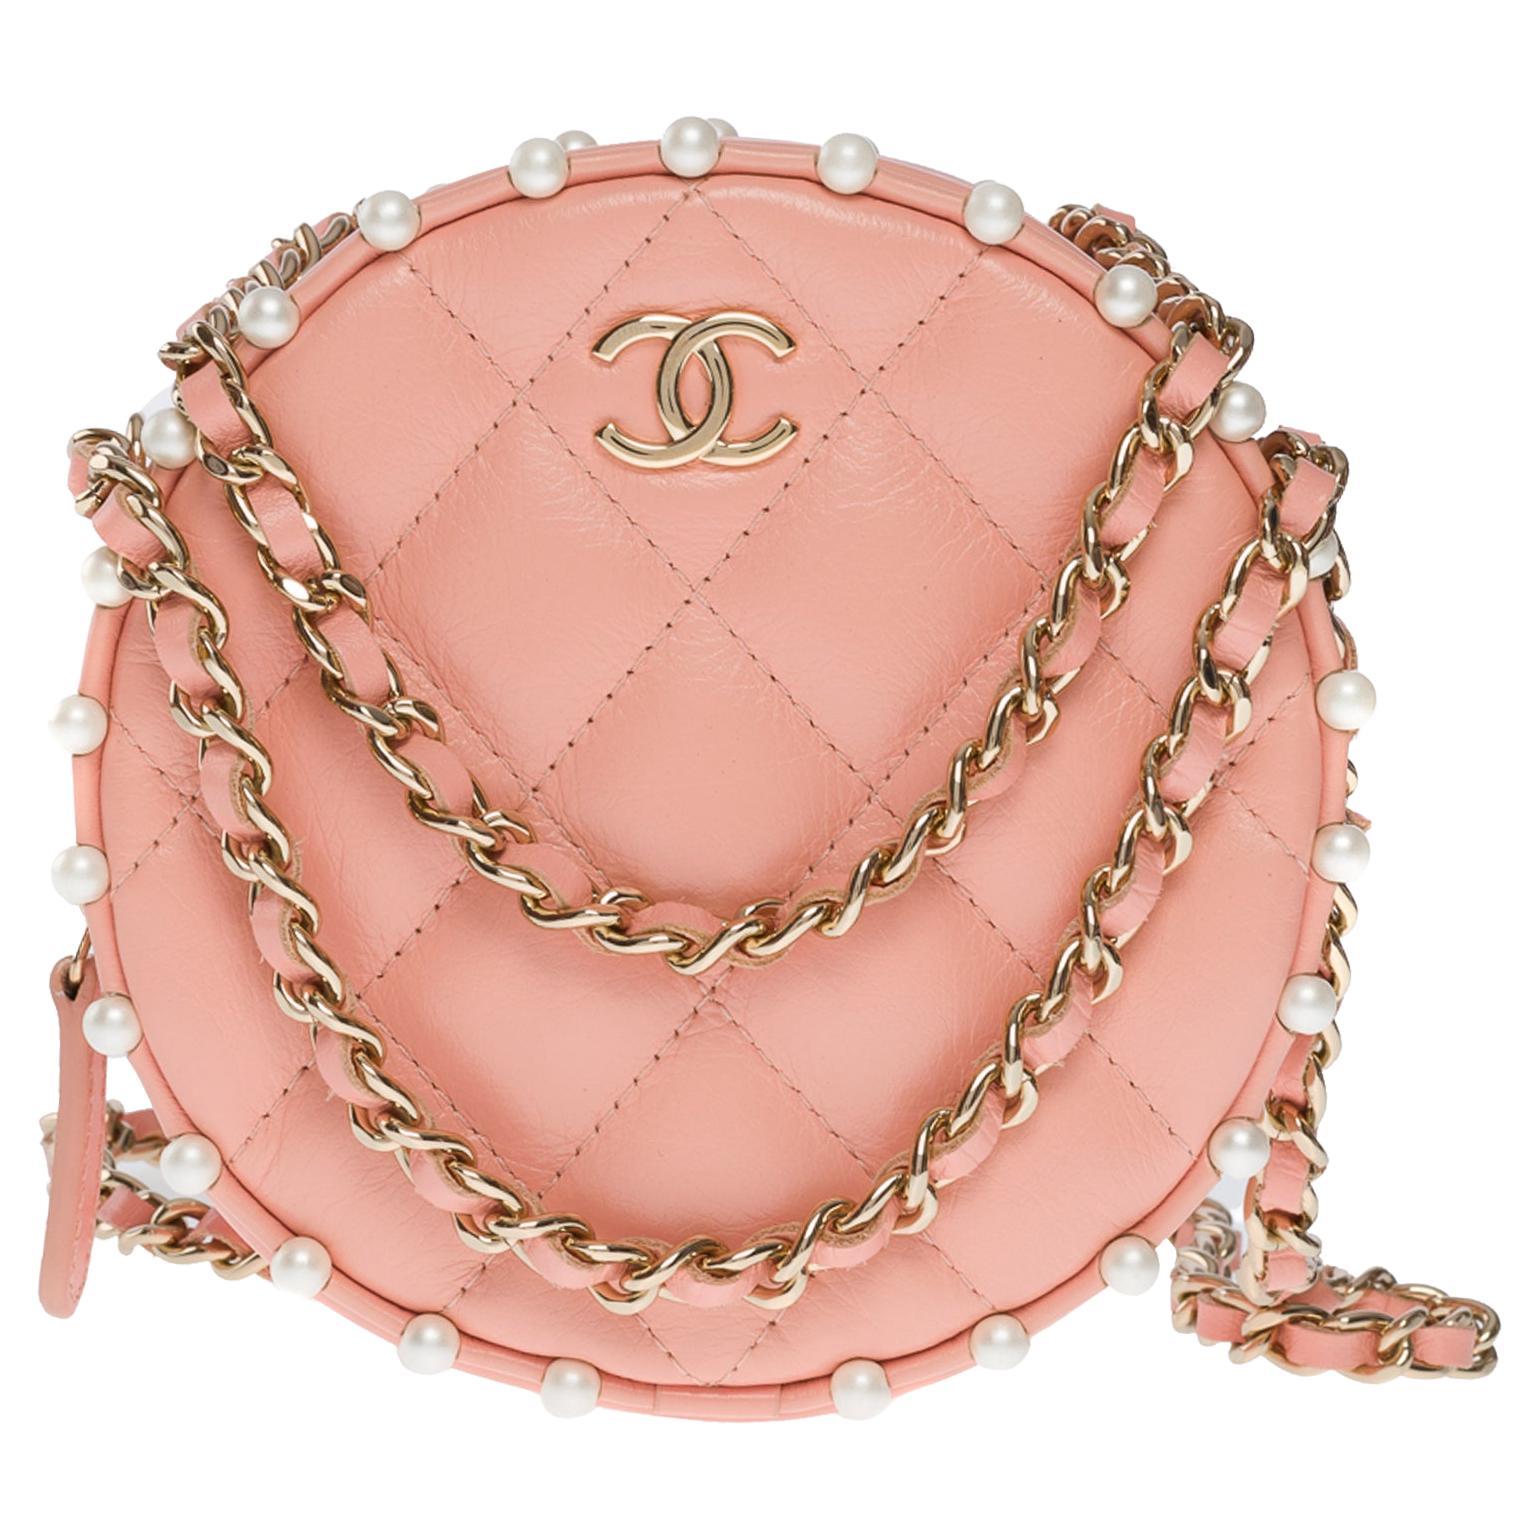 New- Amazing Chanel Round On Earth shoulder bag in Pink quilted